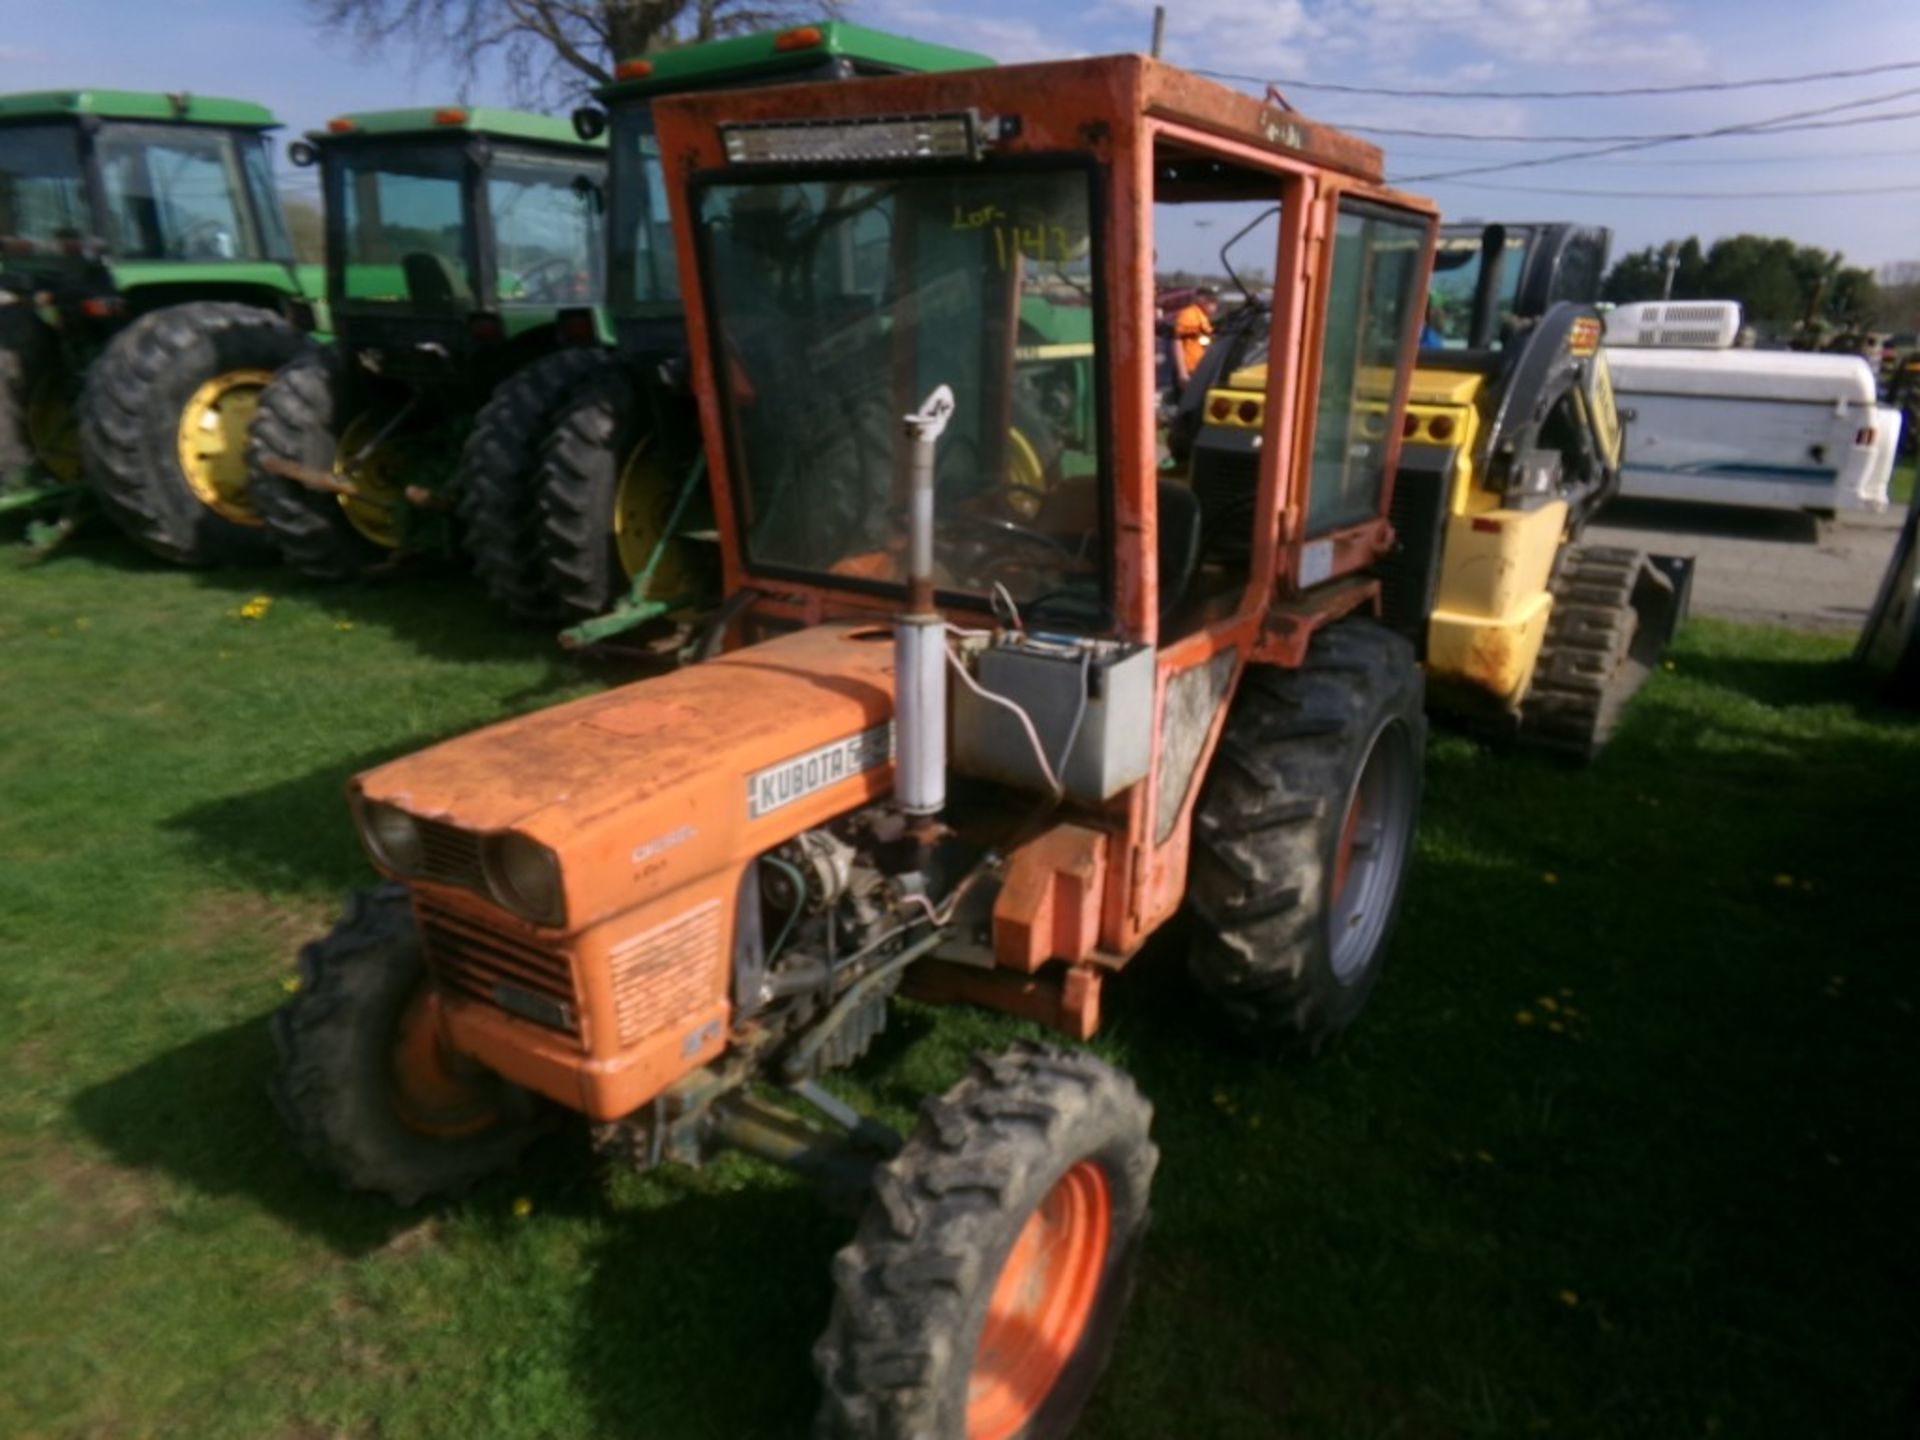 Kubota L245DT 4 WD Compact Tractor with Cab, PTO, 3 PT Hitch, Single Rear Hydraulics, Runs Fine